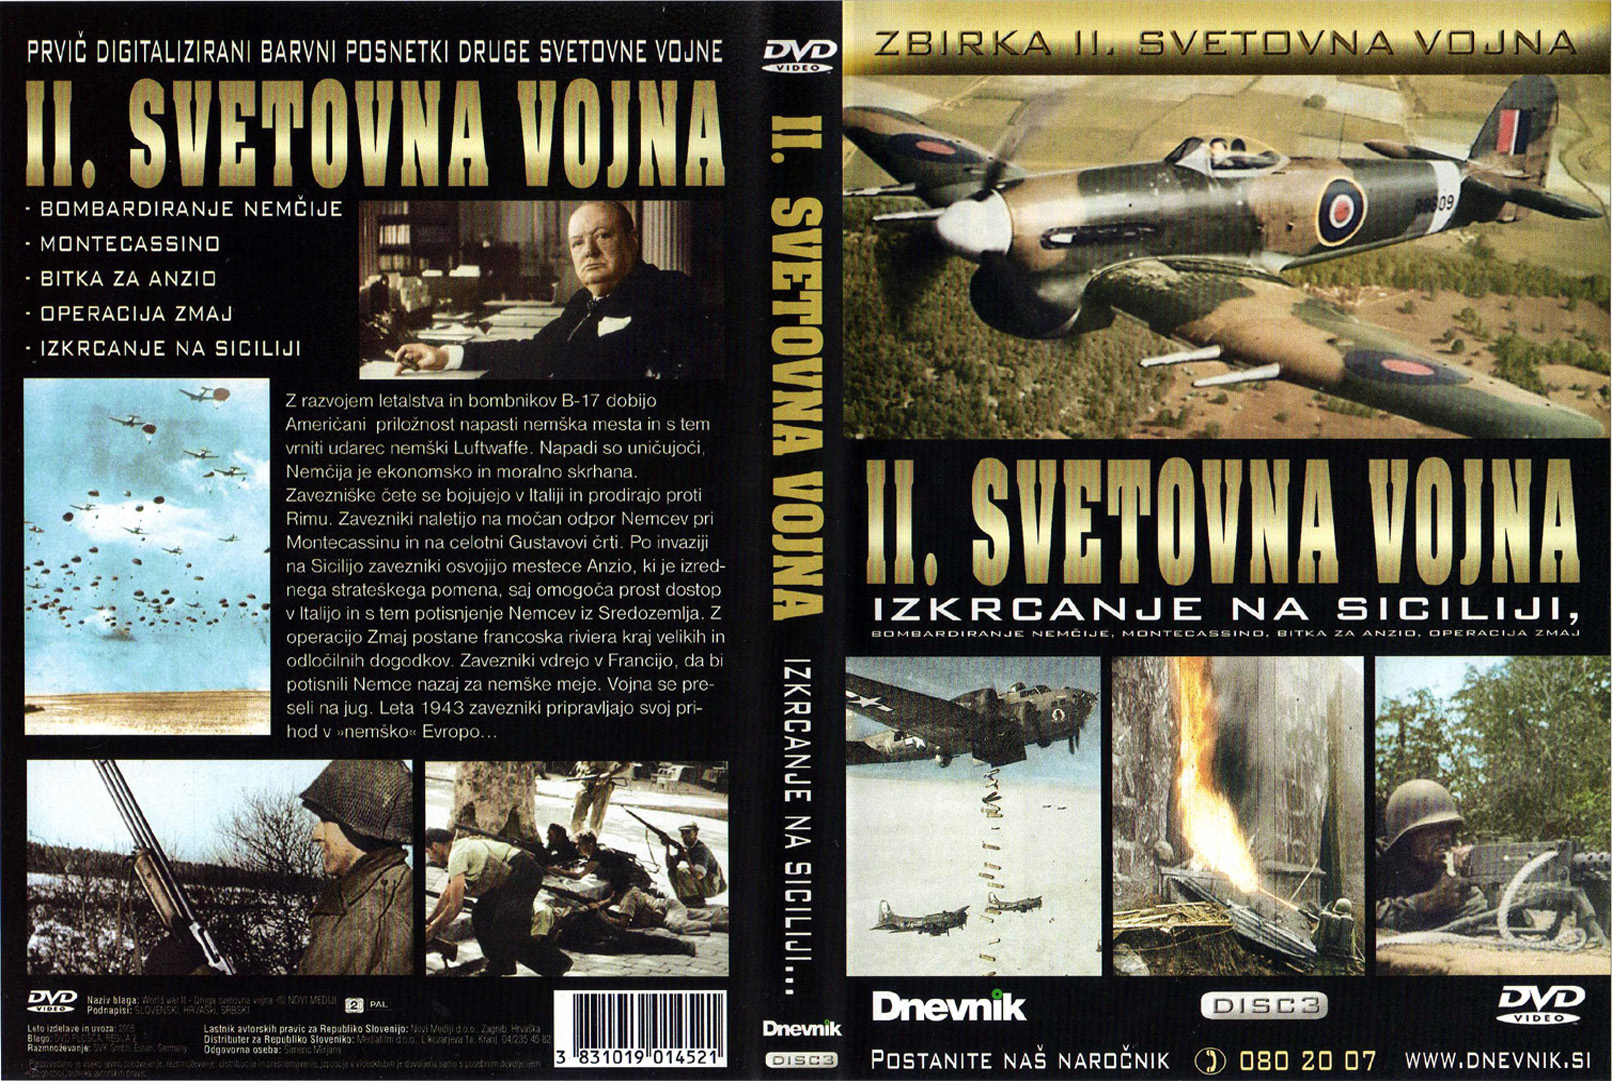 Click to view full size image -  DVD Cover - I - iskrcavanje_na_siciliju_slo_dvd - iskrcavanje_na_siciliju_slo_dvd.jpg